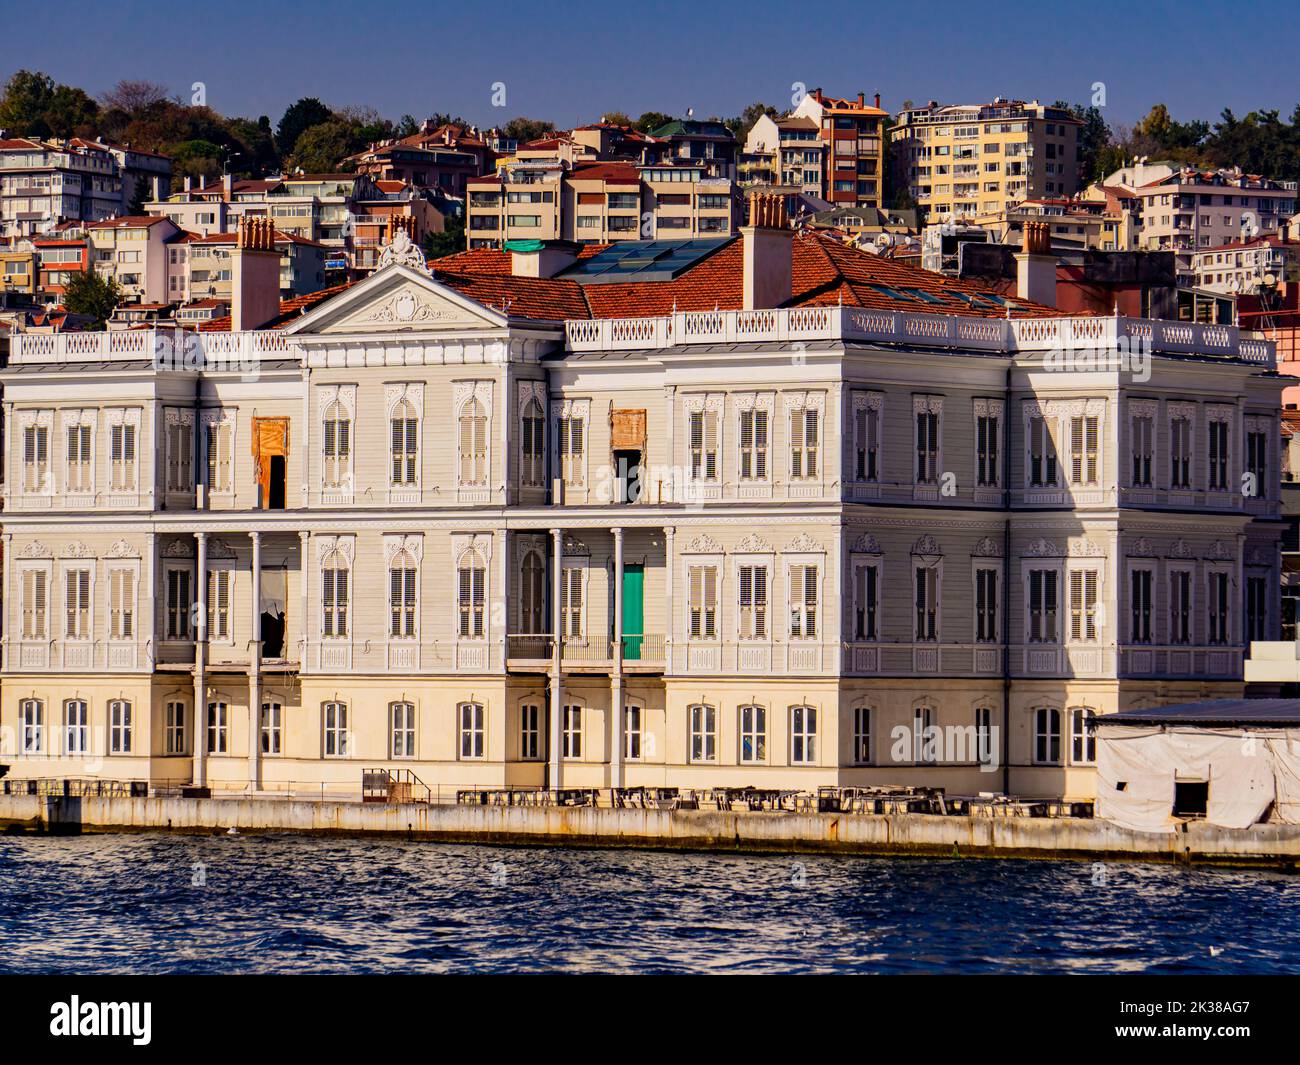 Hatice Sultan and Naime Sultan Yali at Bosphorus in Istanbul, Turkey. It was probably built in 1899 and renovated in 1984. Stock Photo